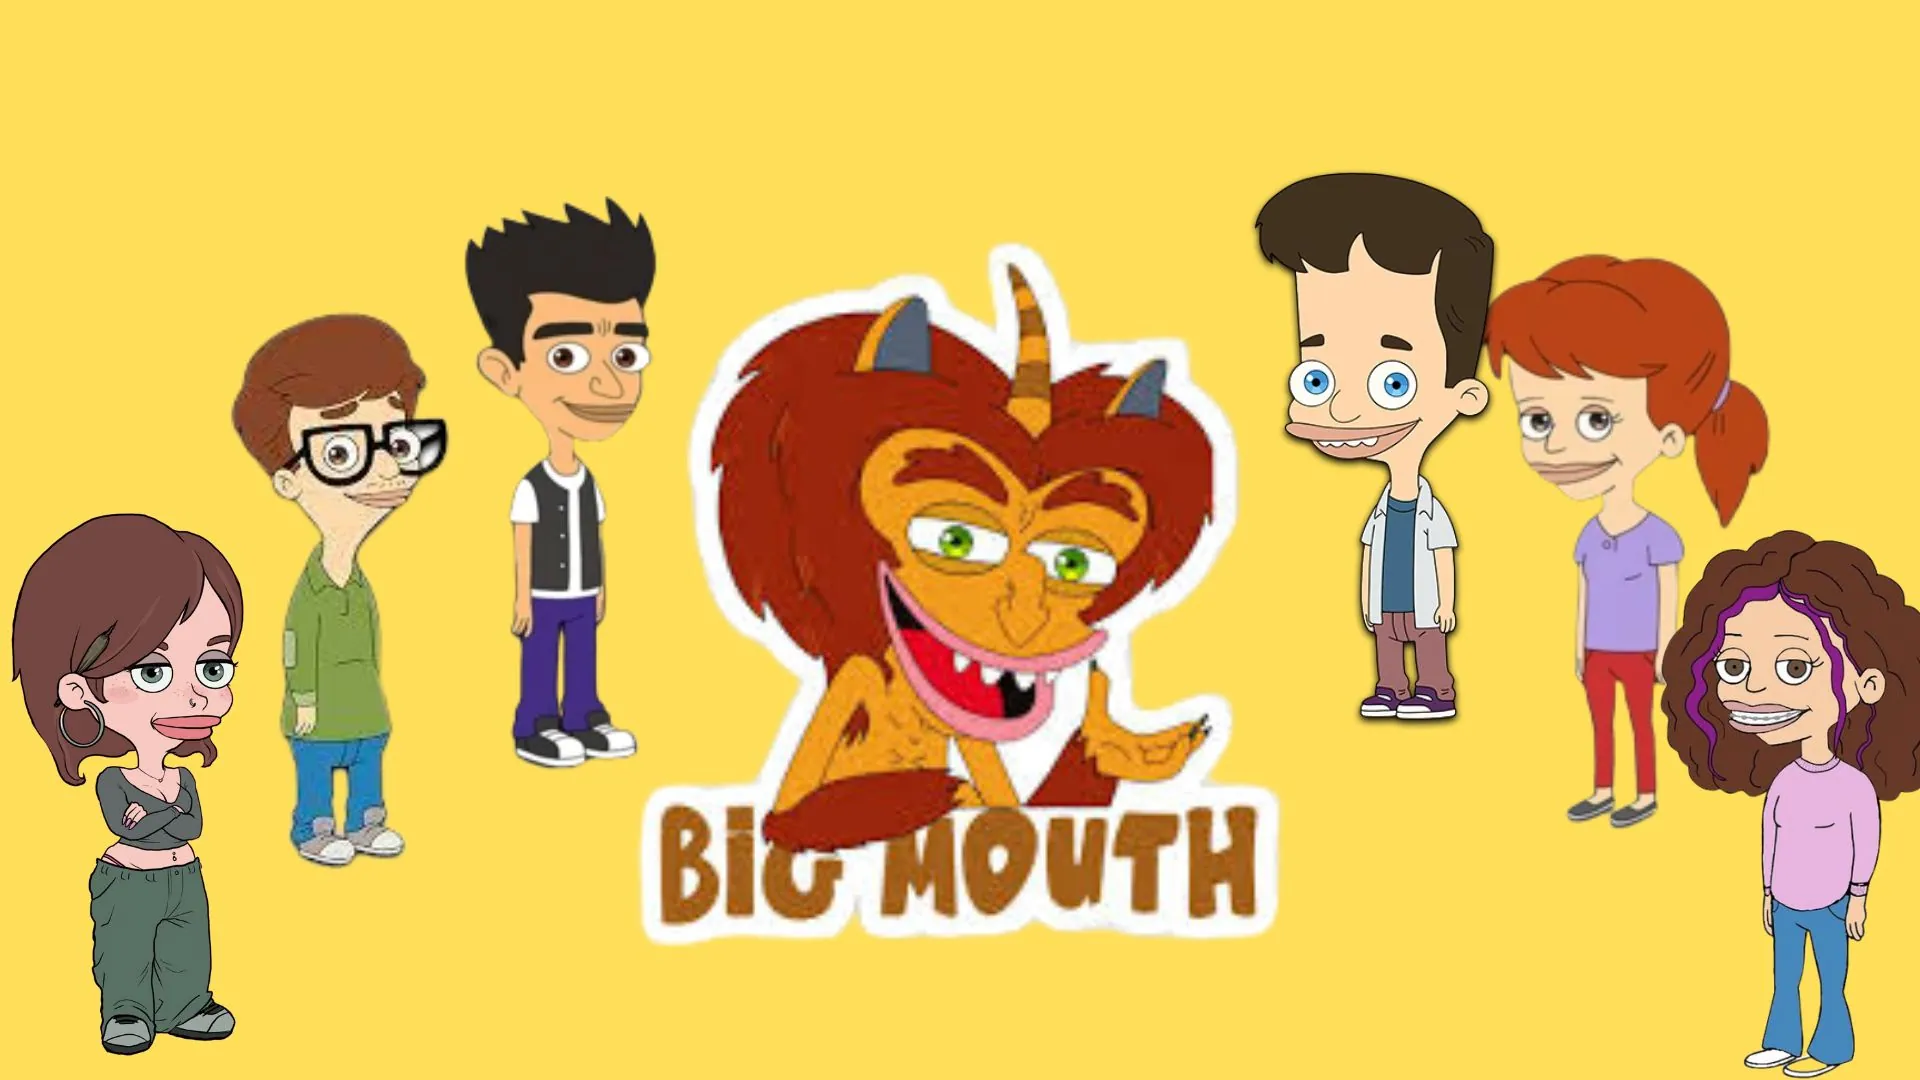 Big Mouth Volume 2 Characters list